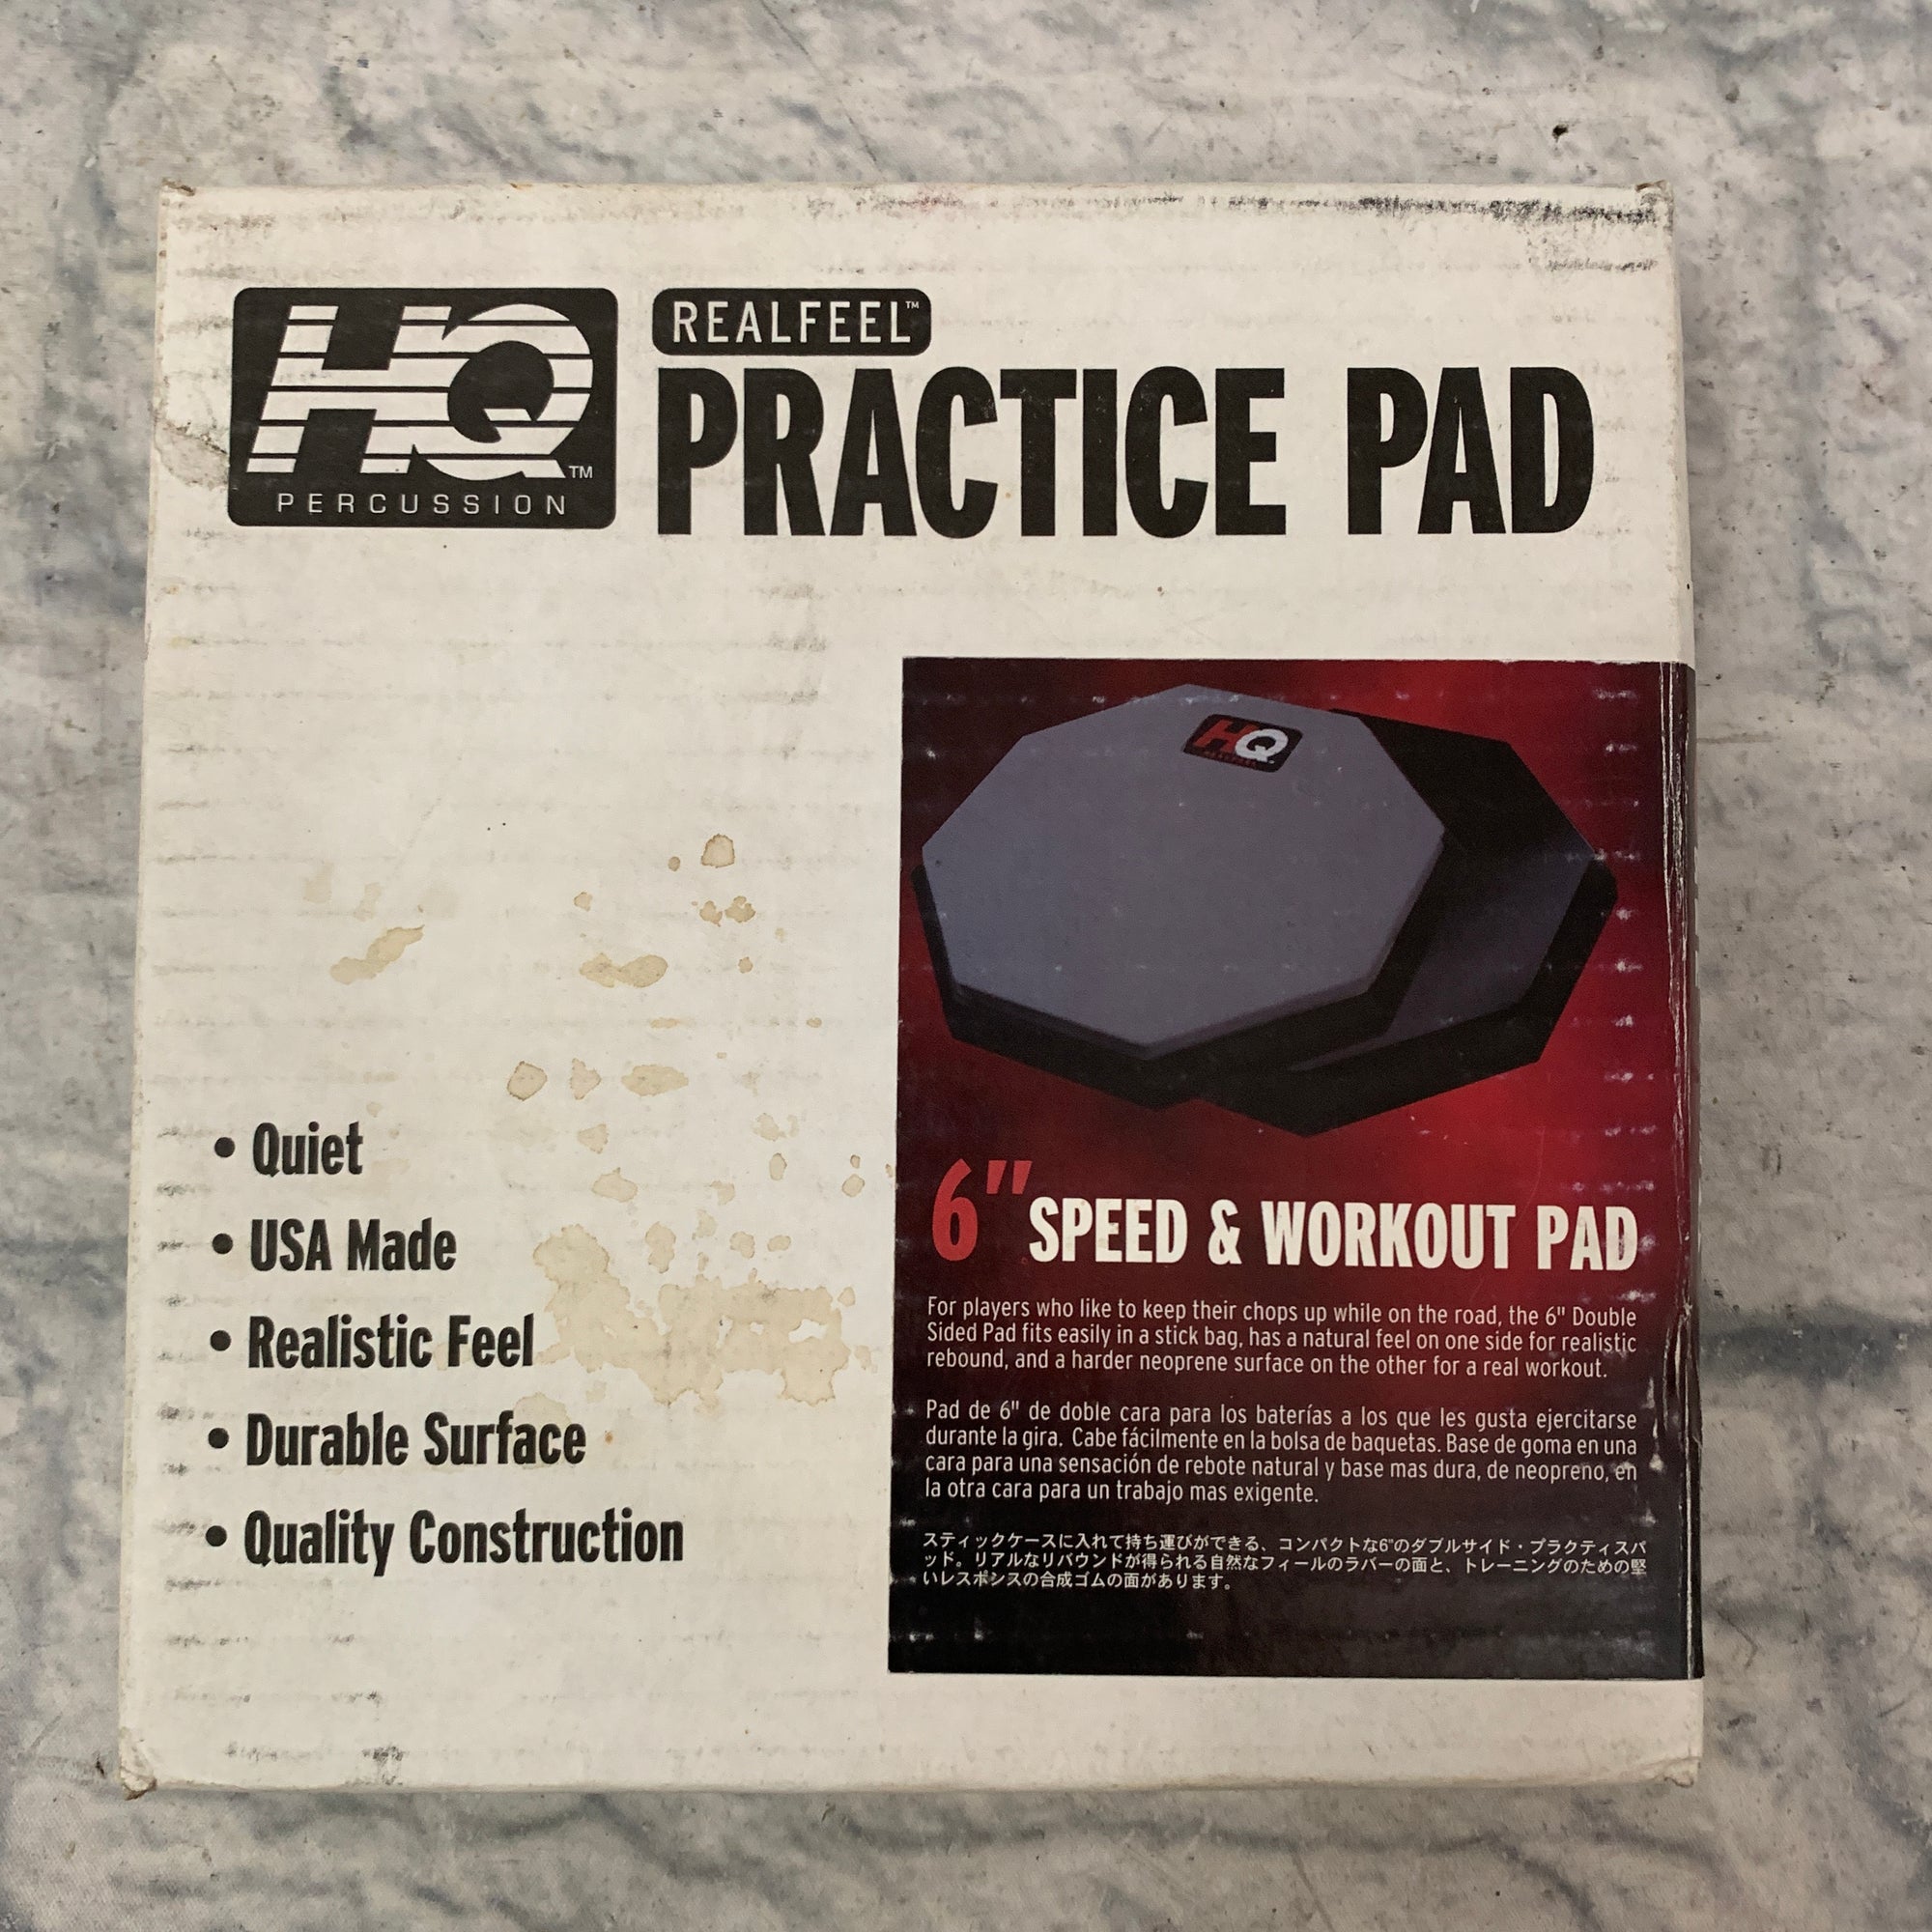 HQ Percussion Evans Real Feel 6 Practice Pad New Old Stock